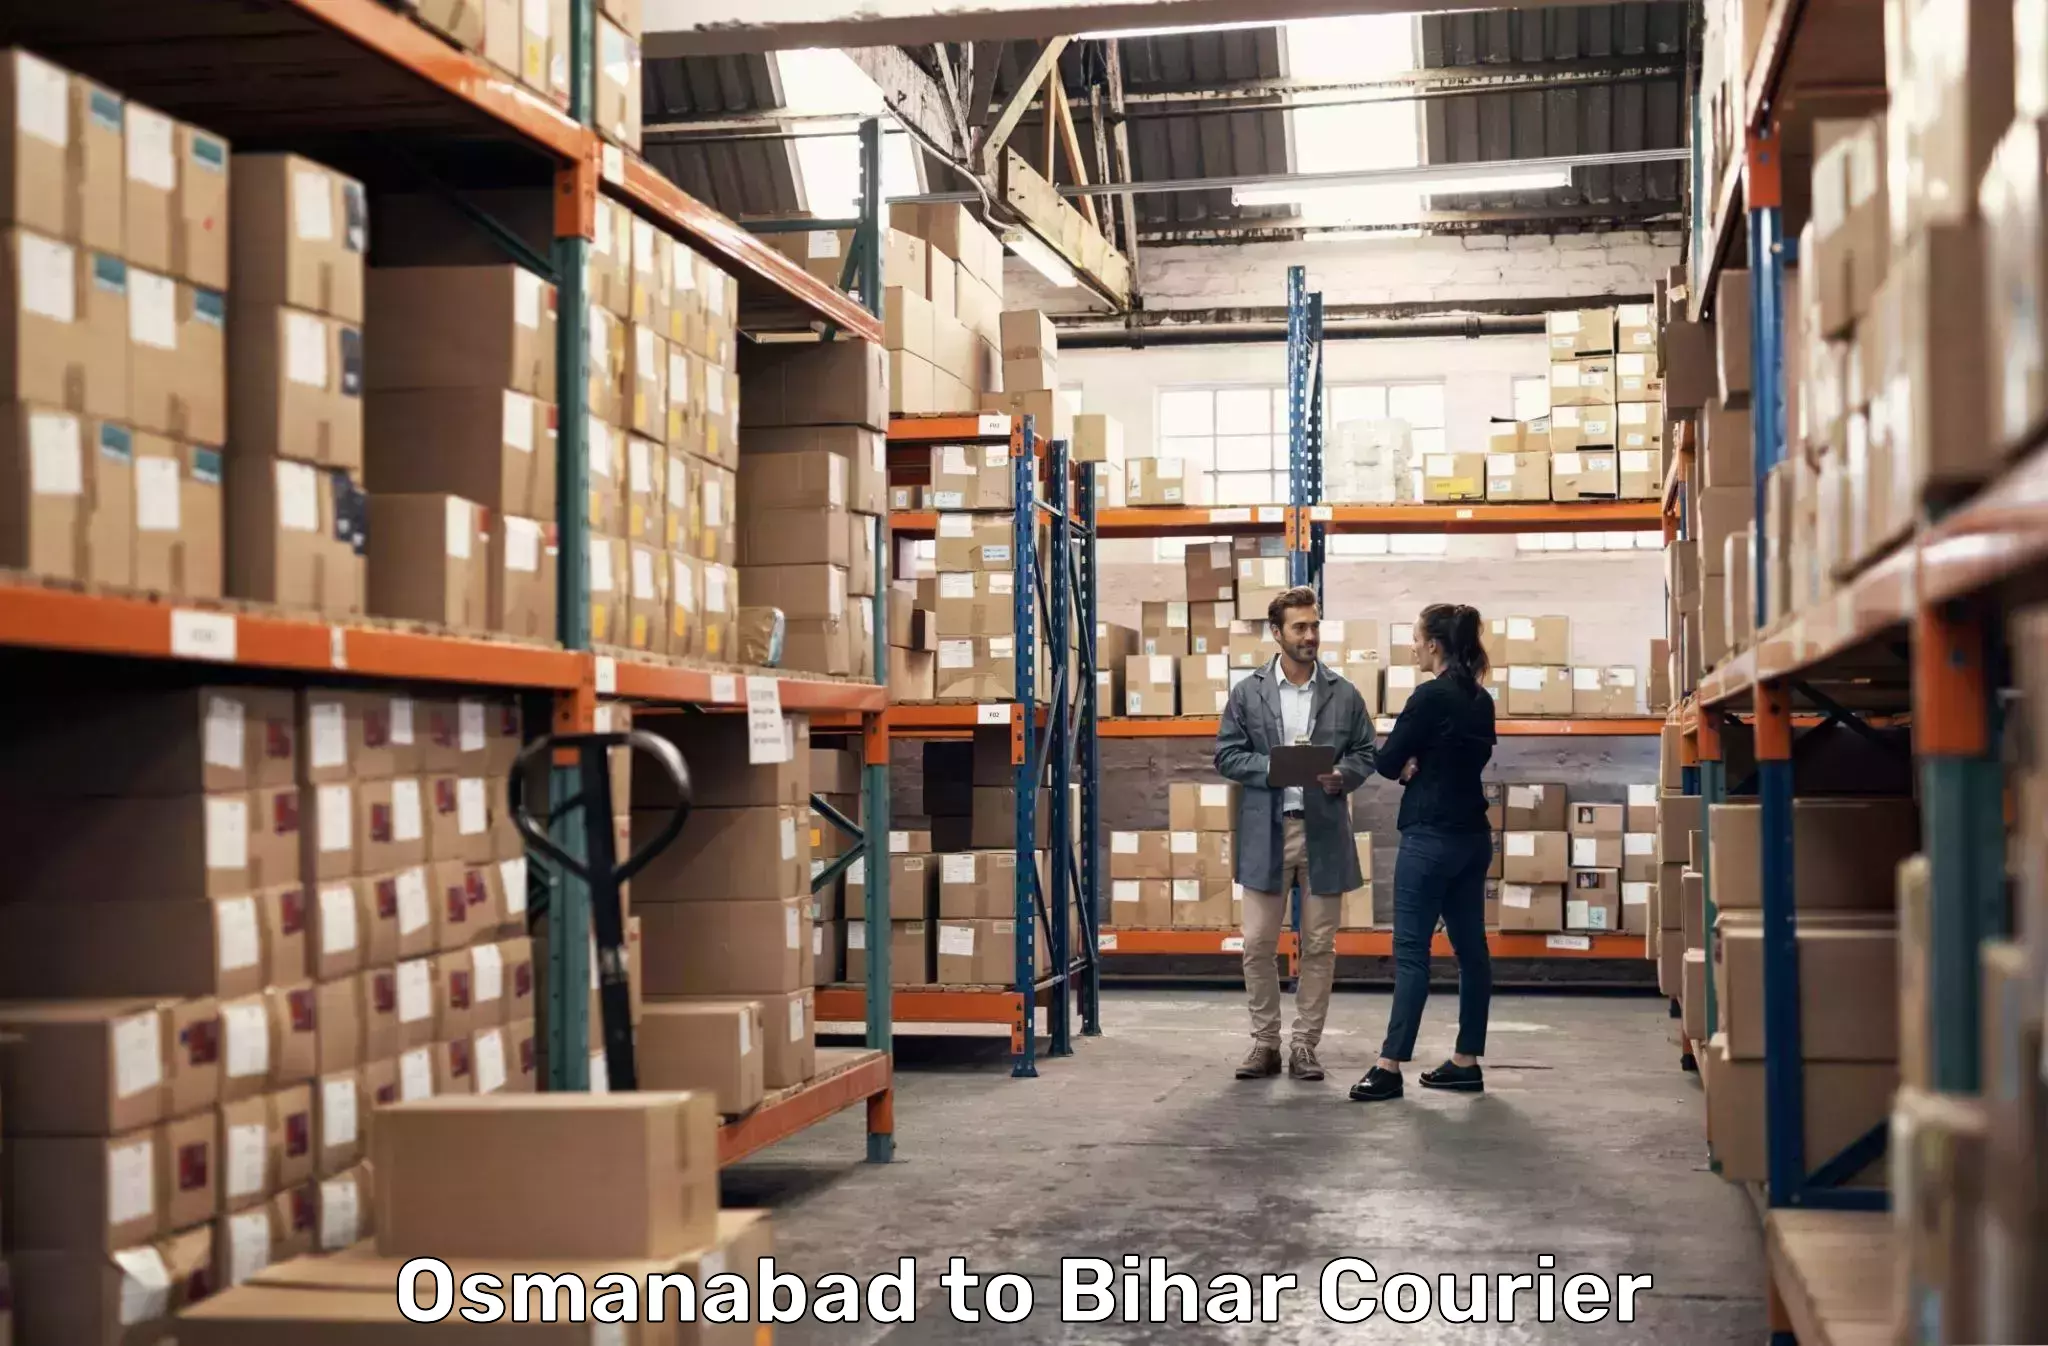 Custom courier packaging Osmanabad to Kharagpur Munger